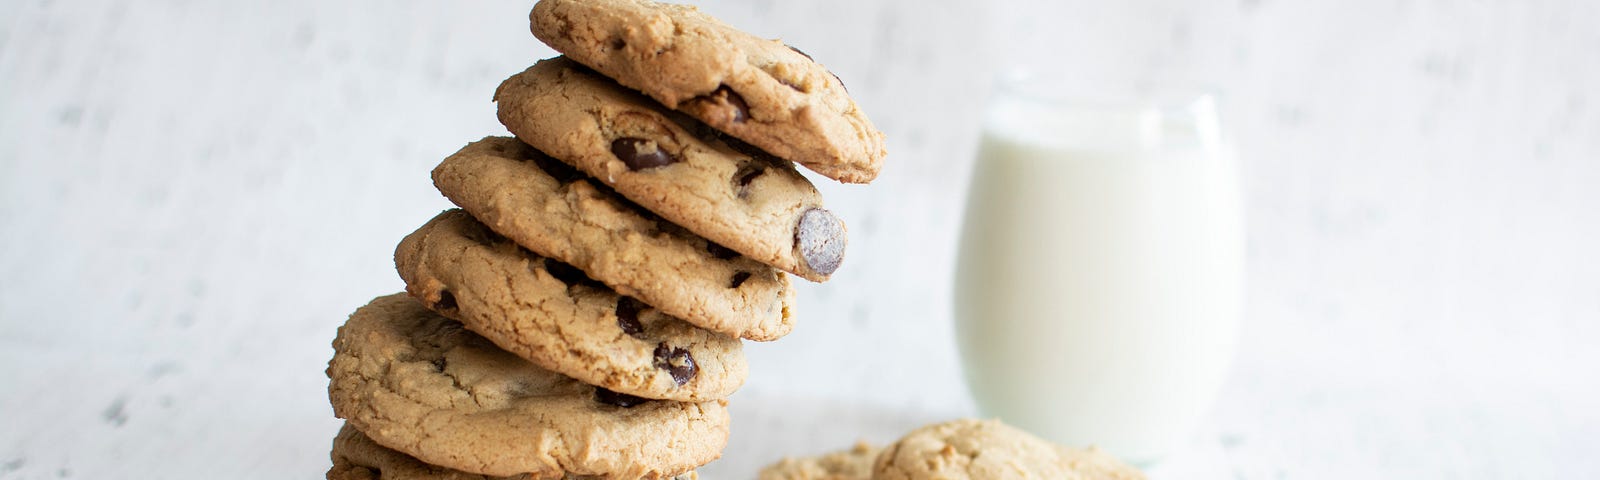 Large pile of chocolate chip cookies beside a glass of milk.